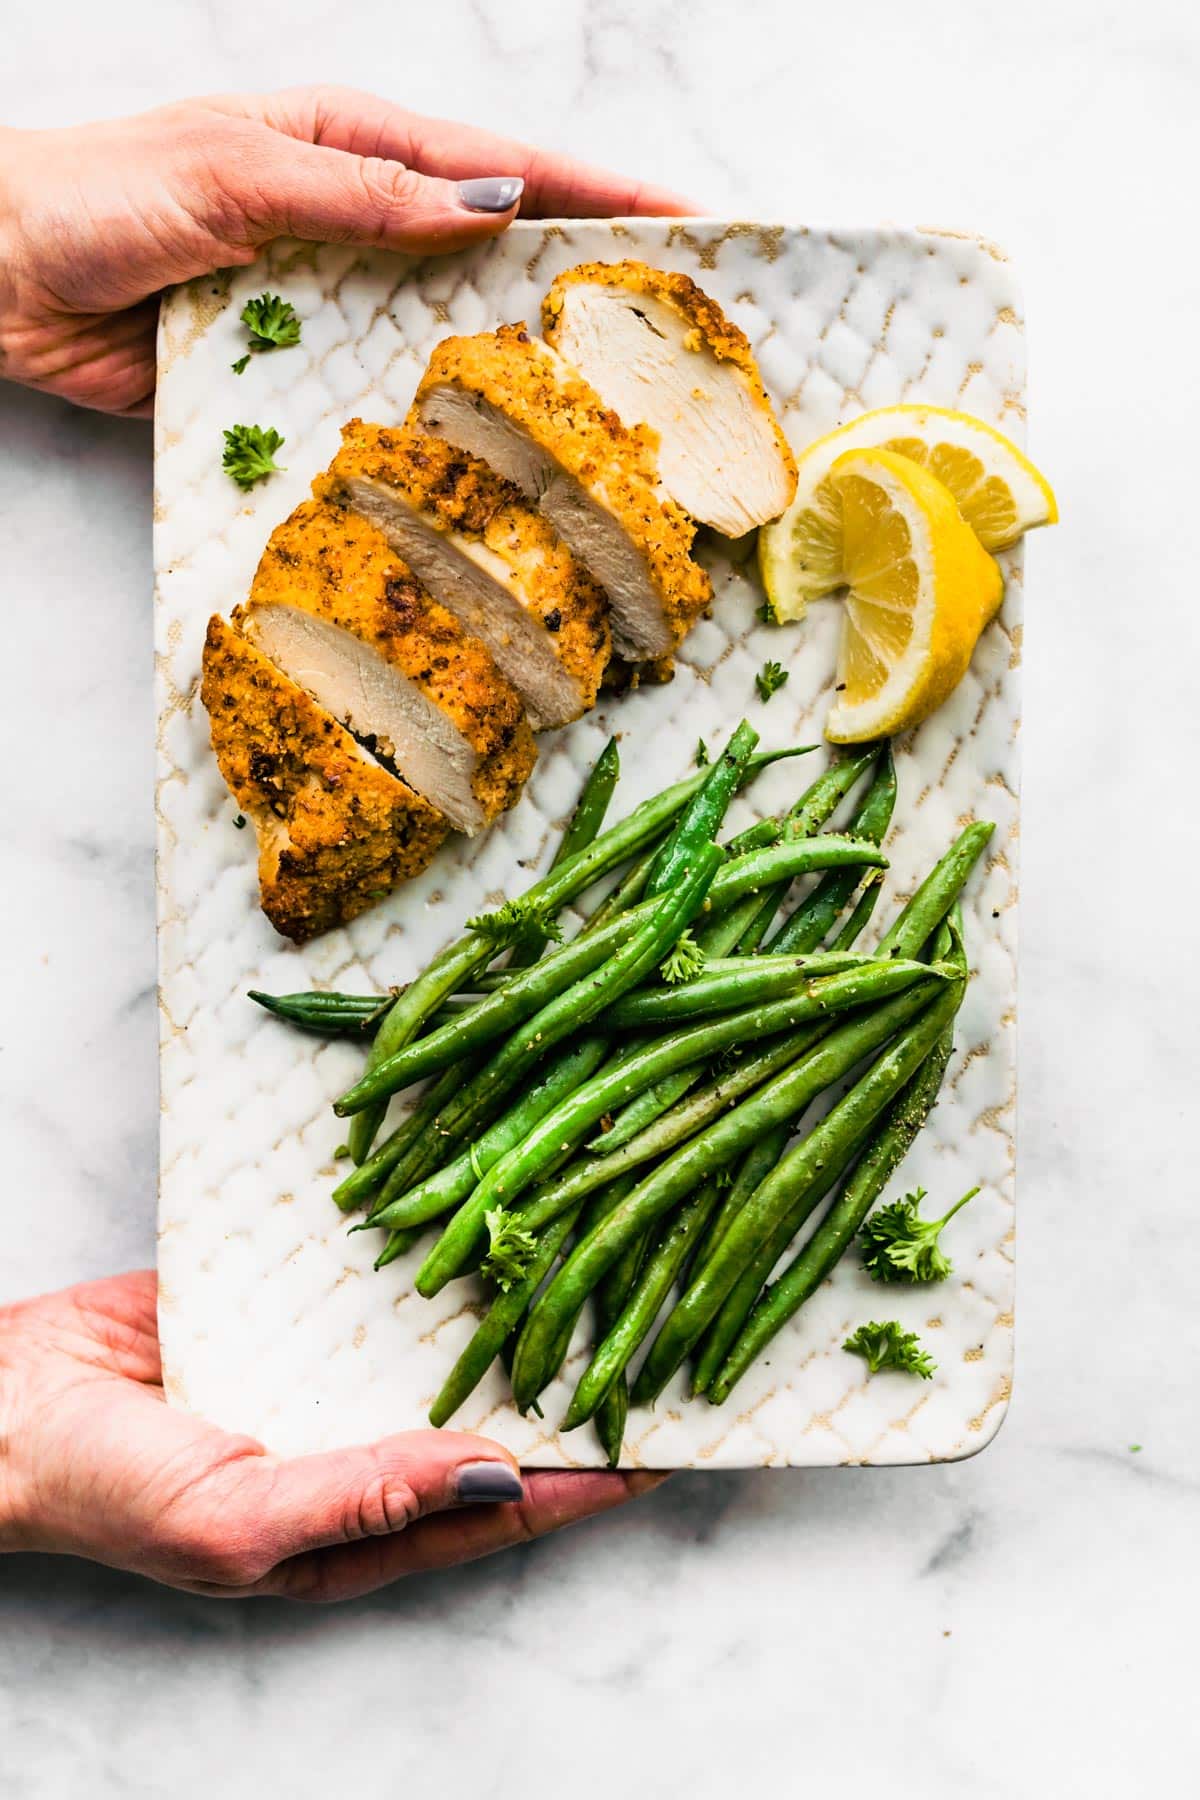 Sliced Gluten-Free Panko Chicken on a plate with green beans and a lemon wedge.